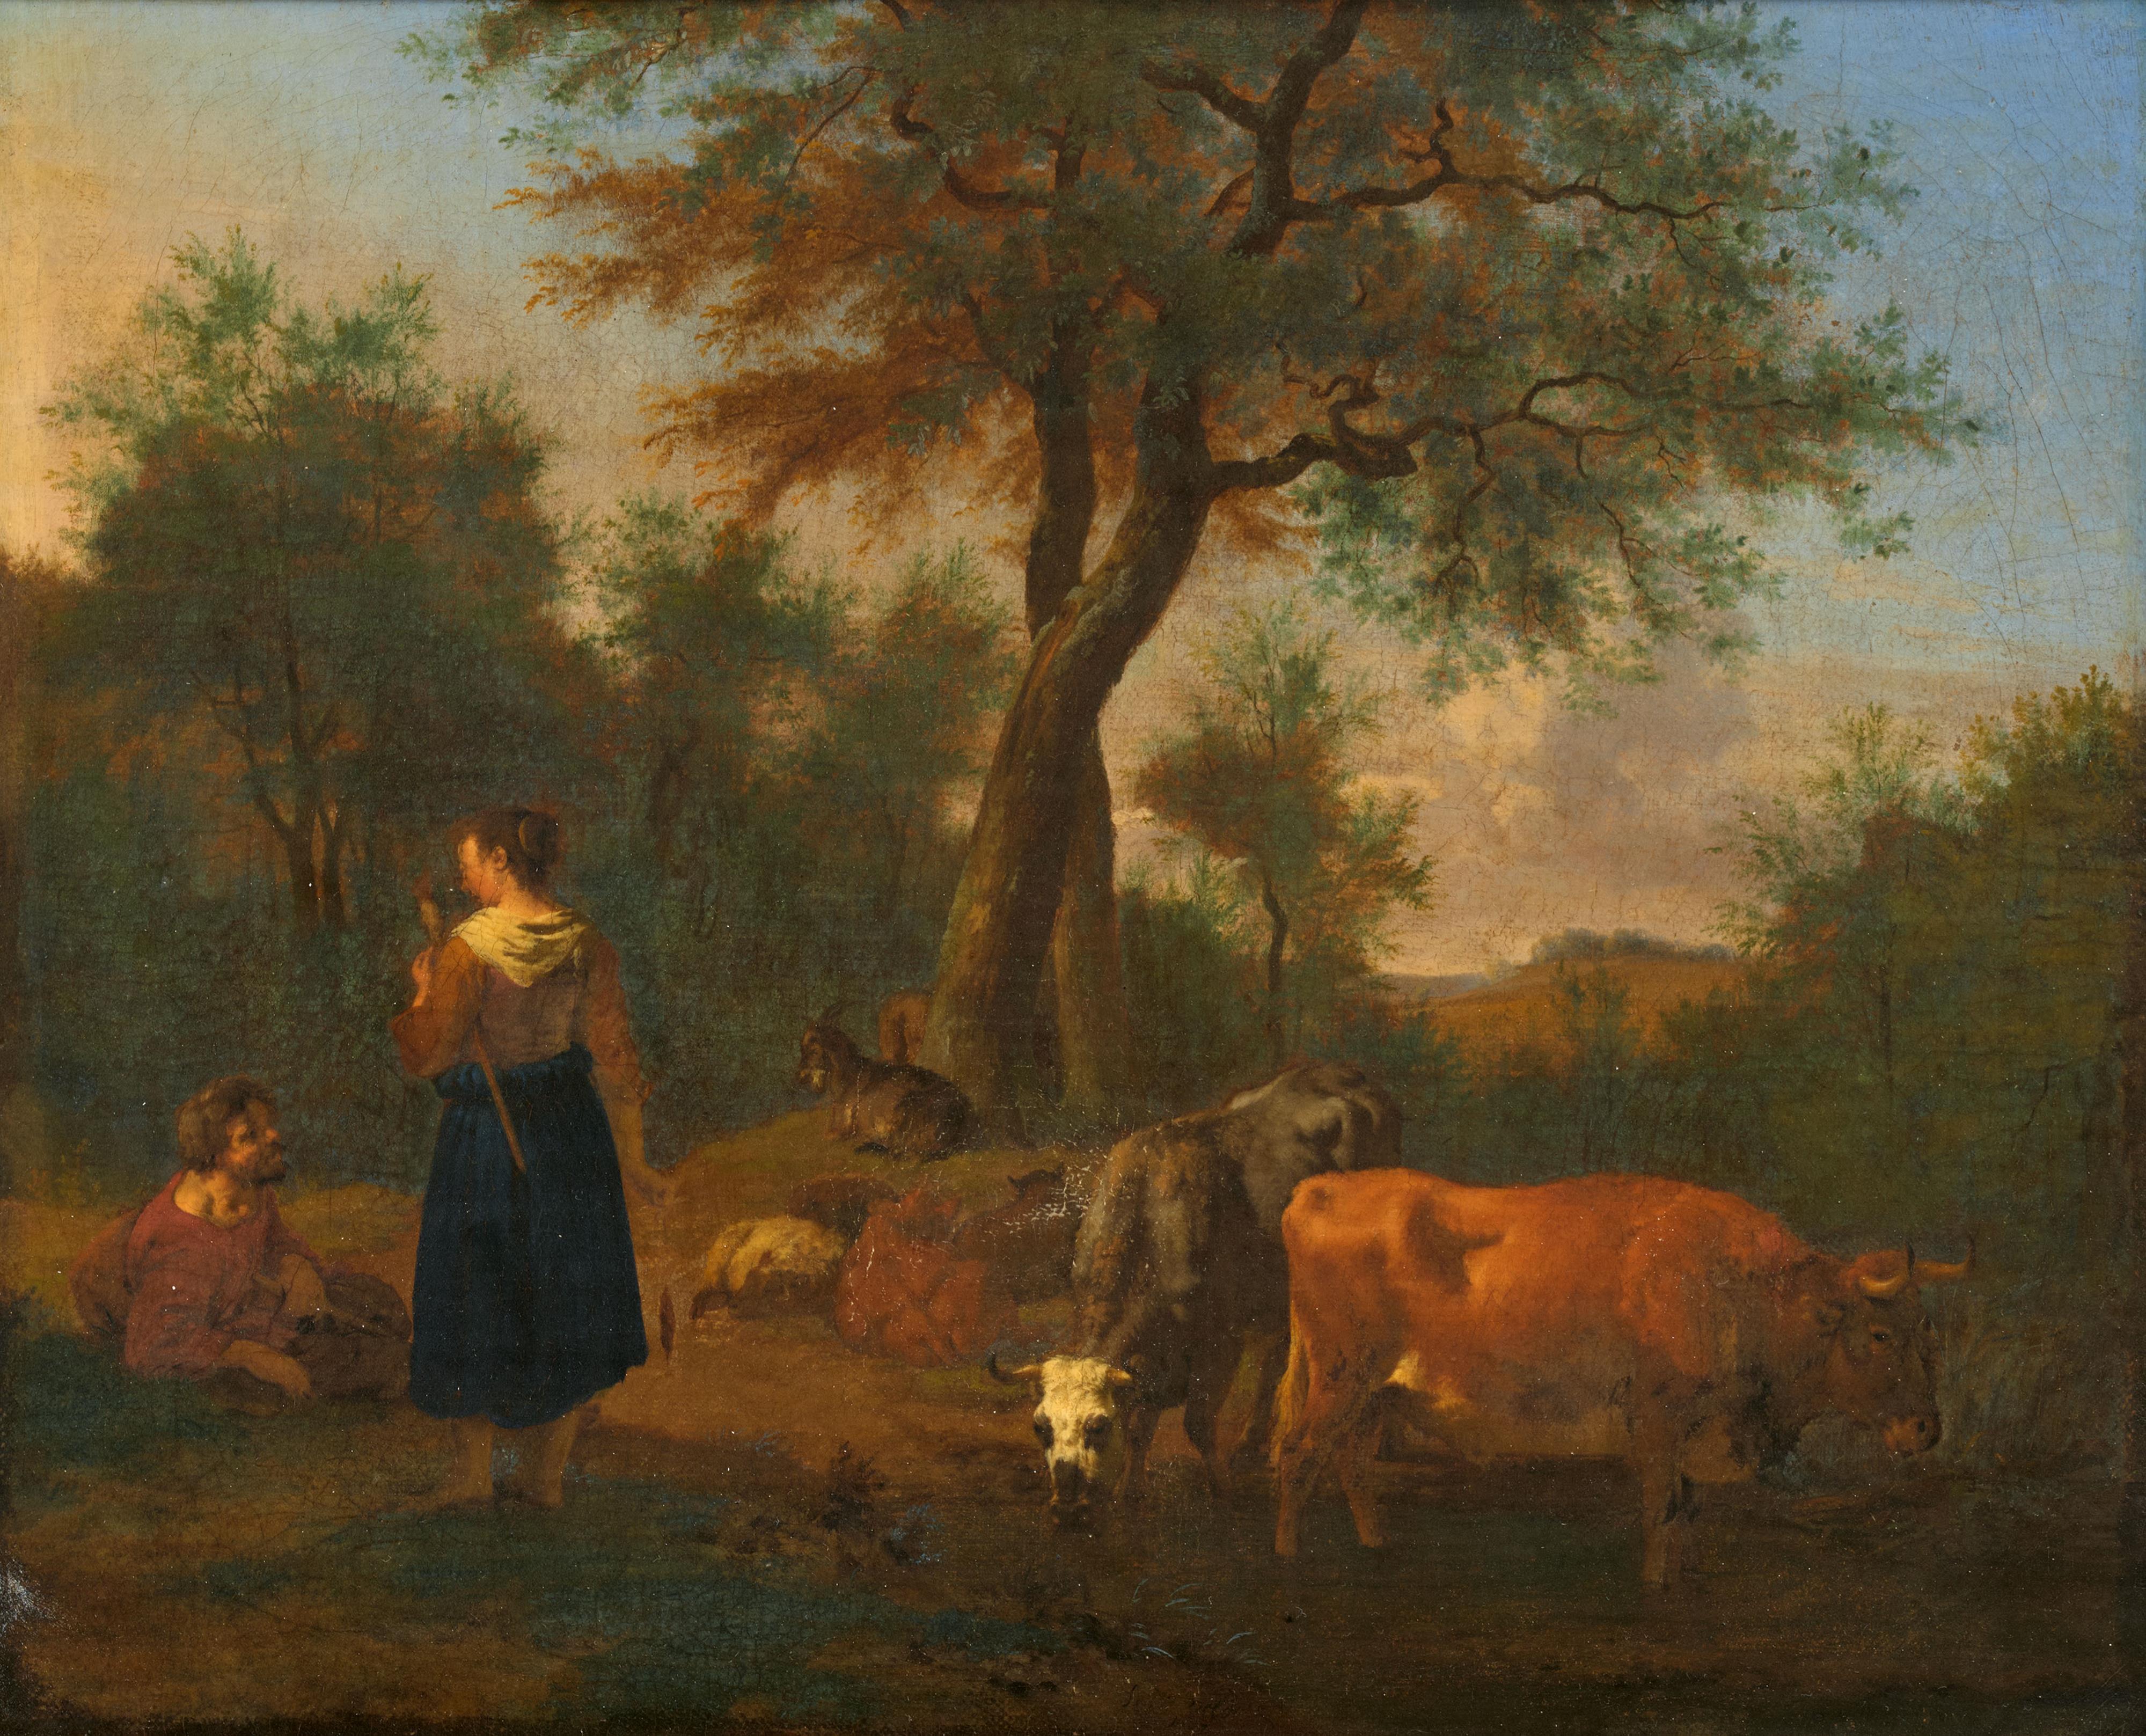 Adriaen van de Velde - Wooded Landscape with Shepherds, Cattle, Sheep and Goats - image-1